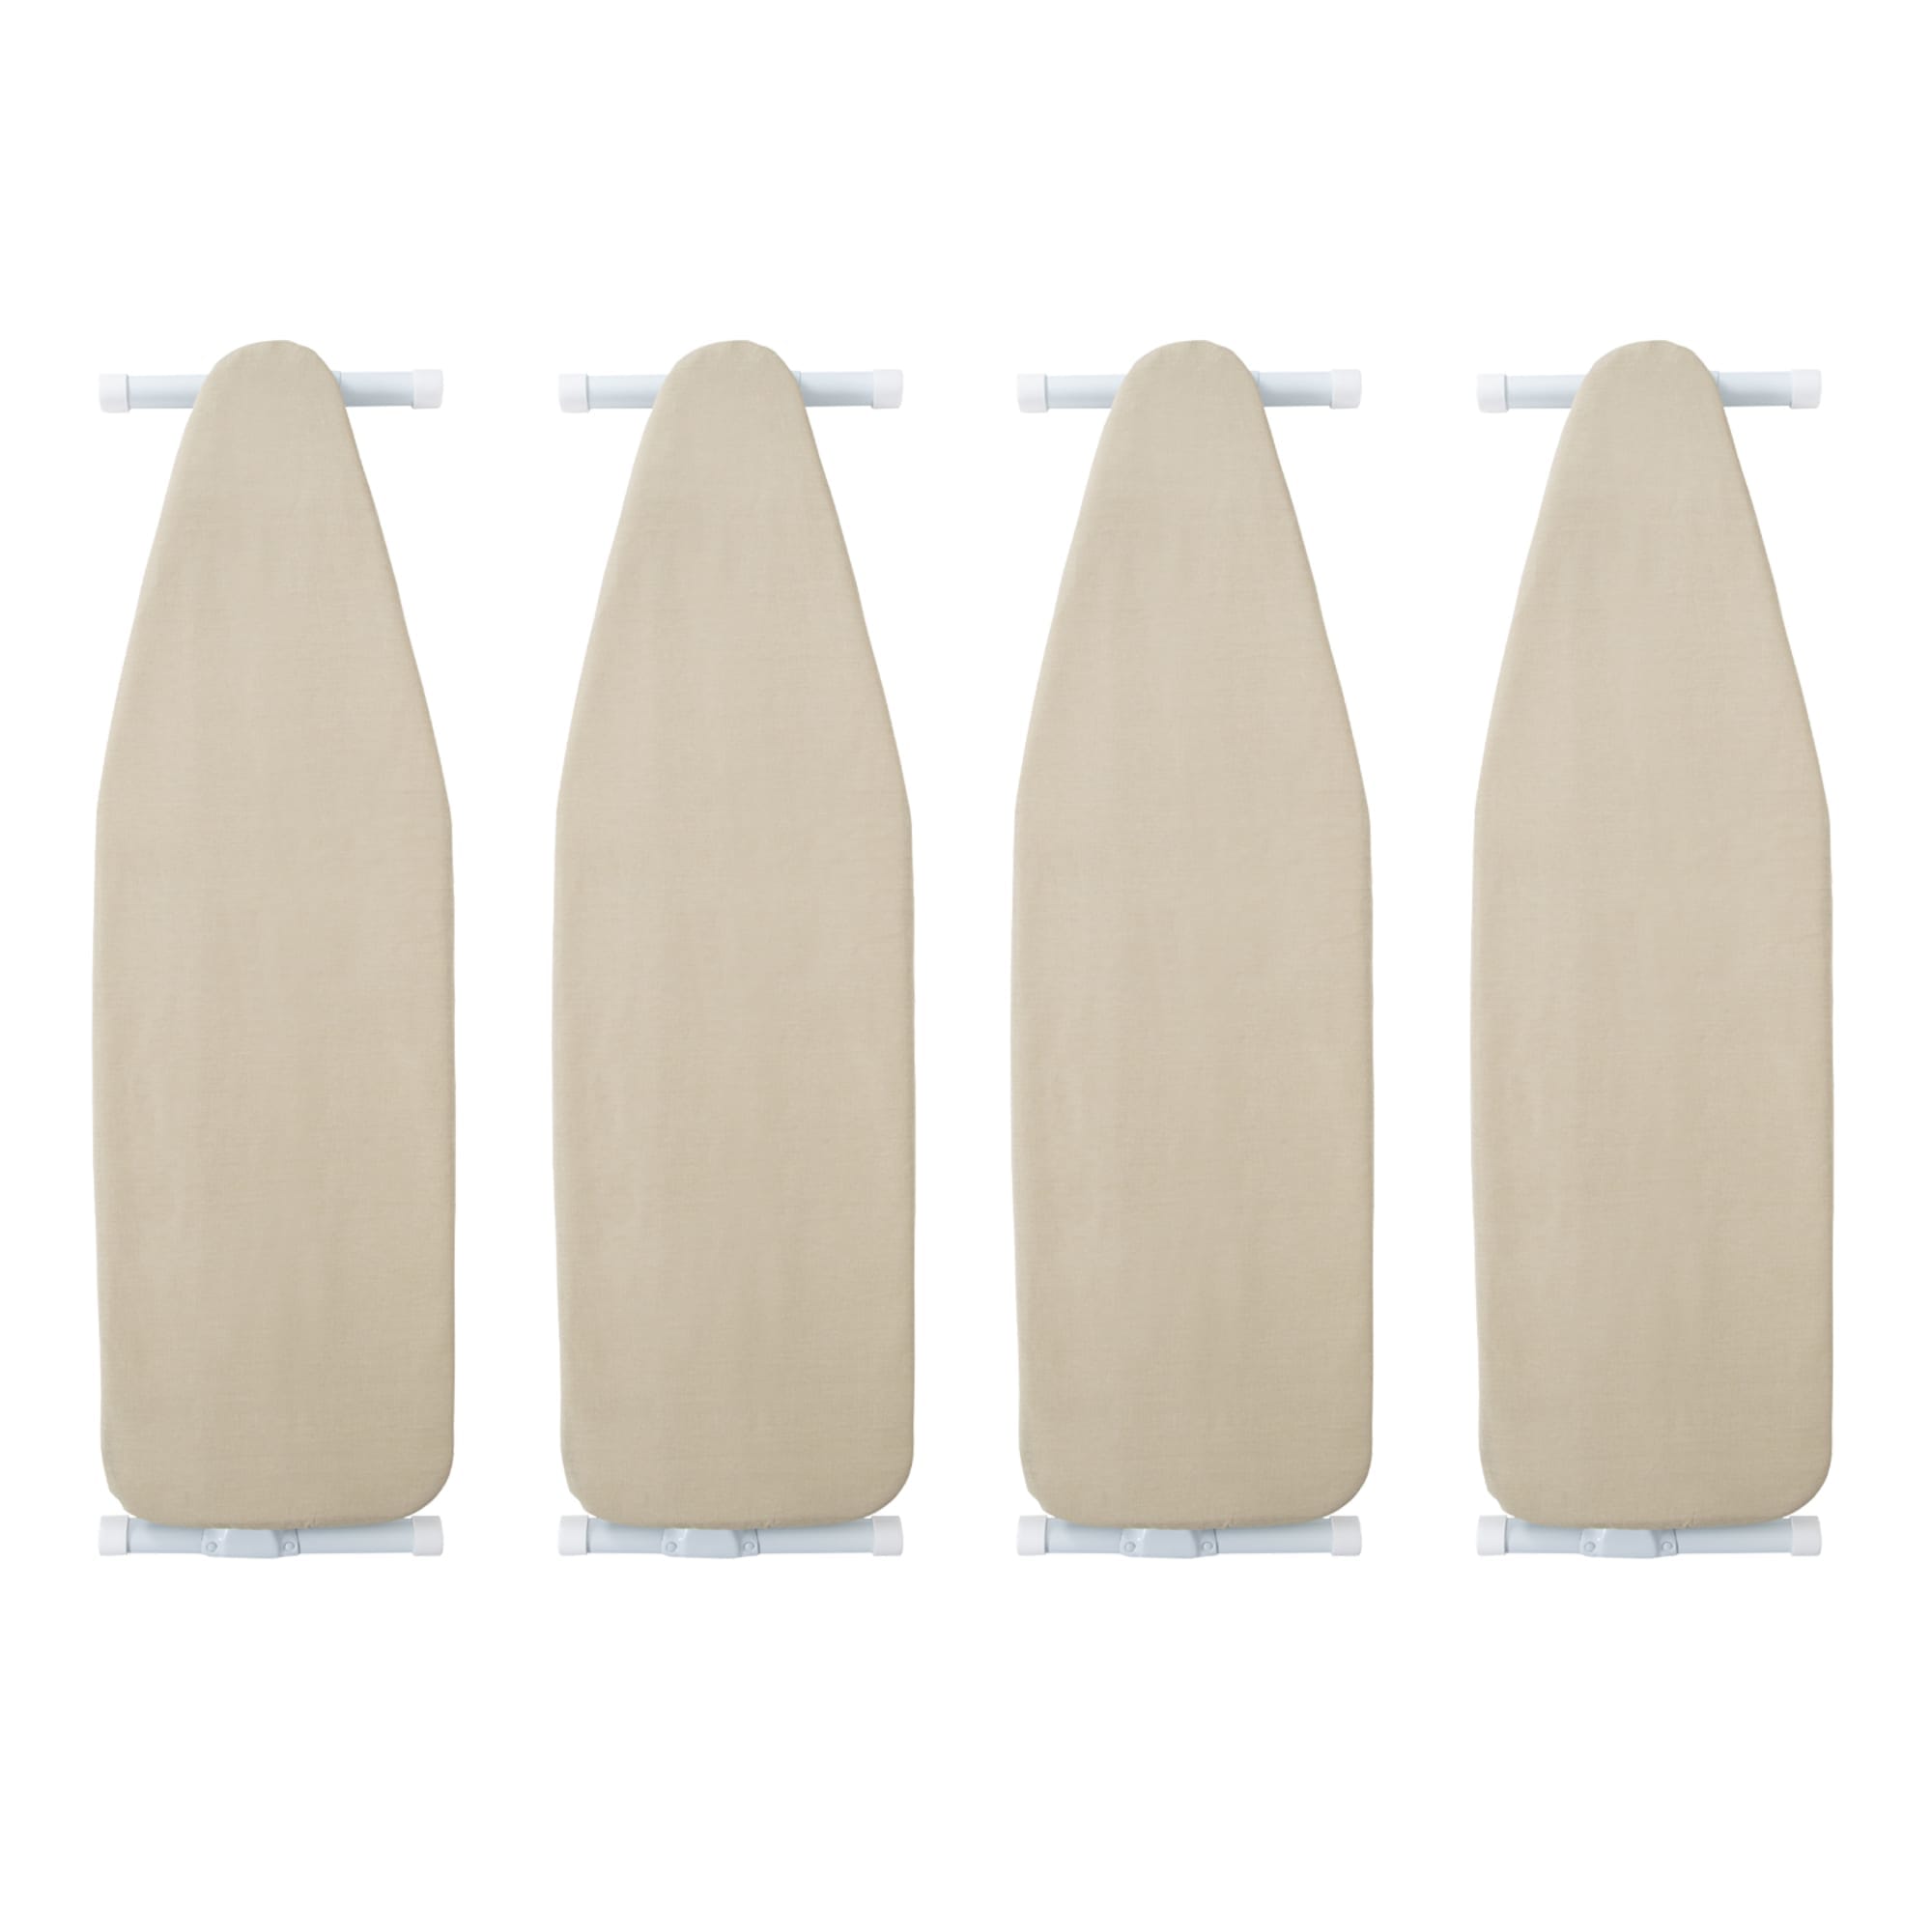 Seymour Home Products Wardroboard, Adjustable Height Ironing Board, Almond (4 Pack) $30.00 EACH, CASE PACK OF 4